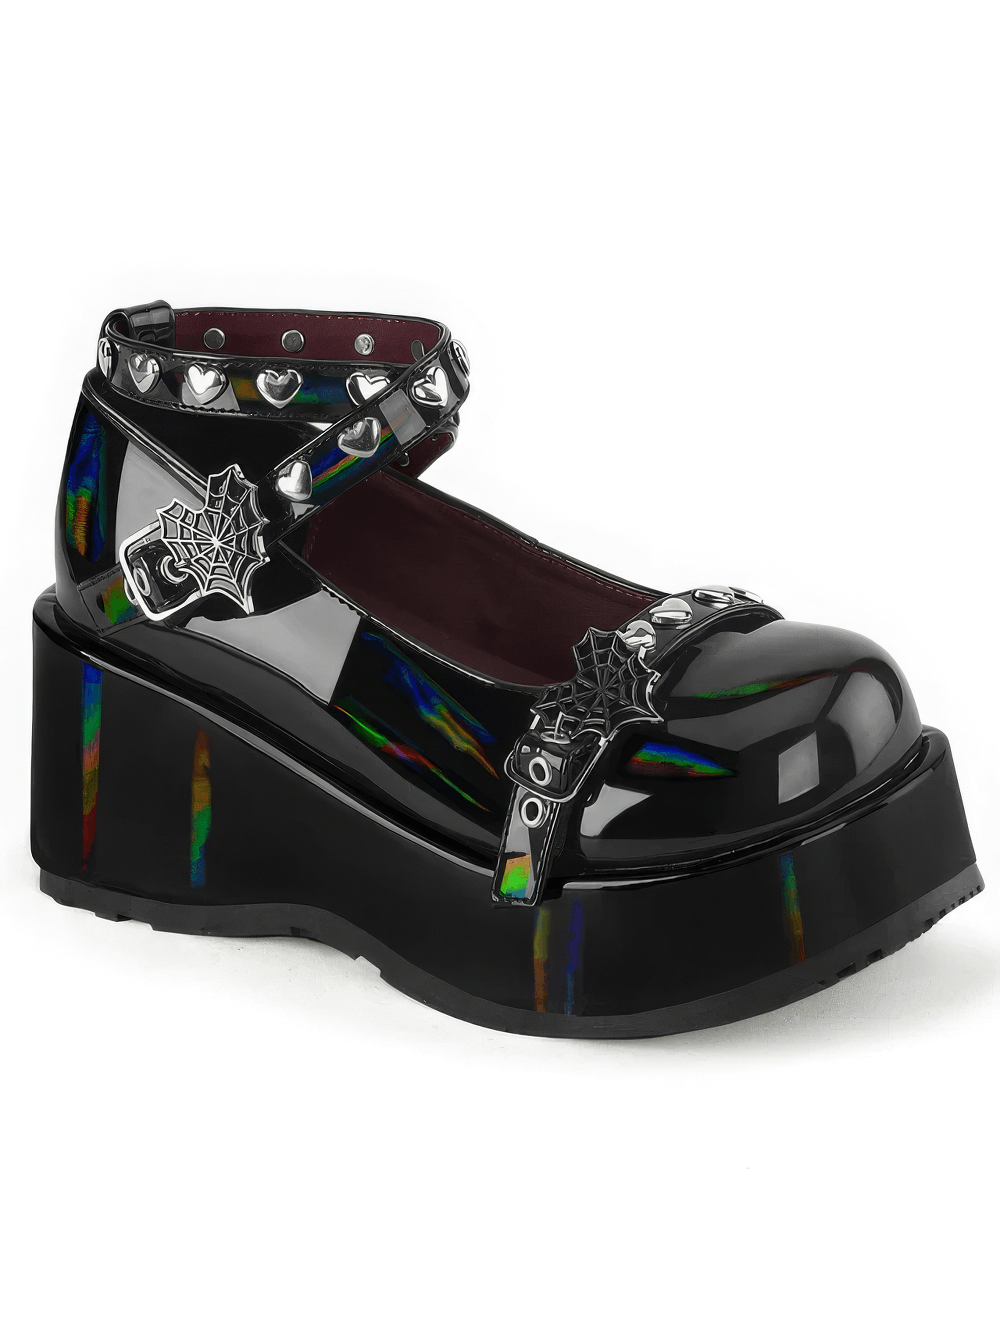 DEMONIA Platform Shoes with Heart Studs and Spiderweb Buckle